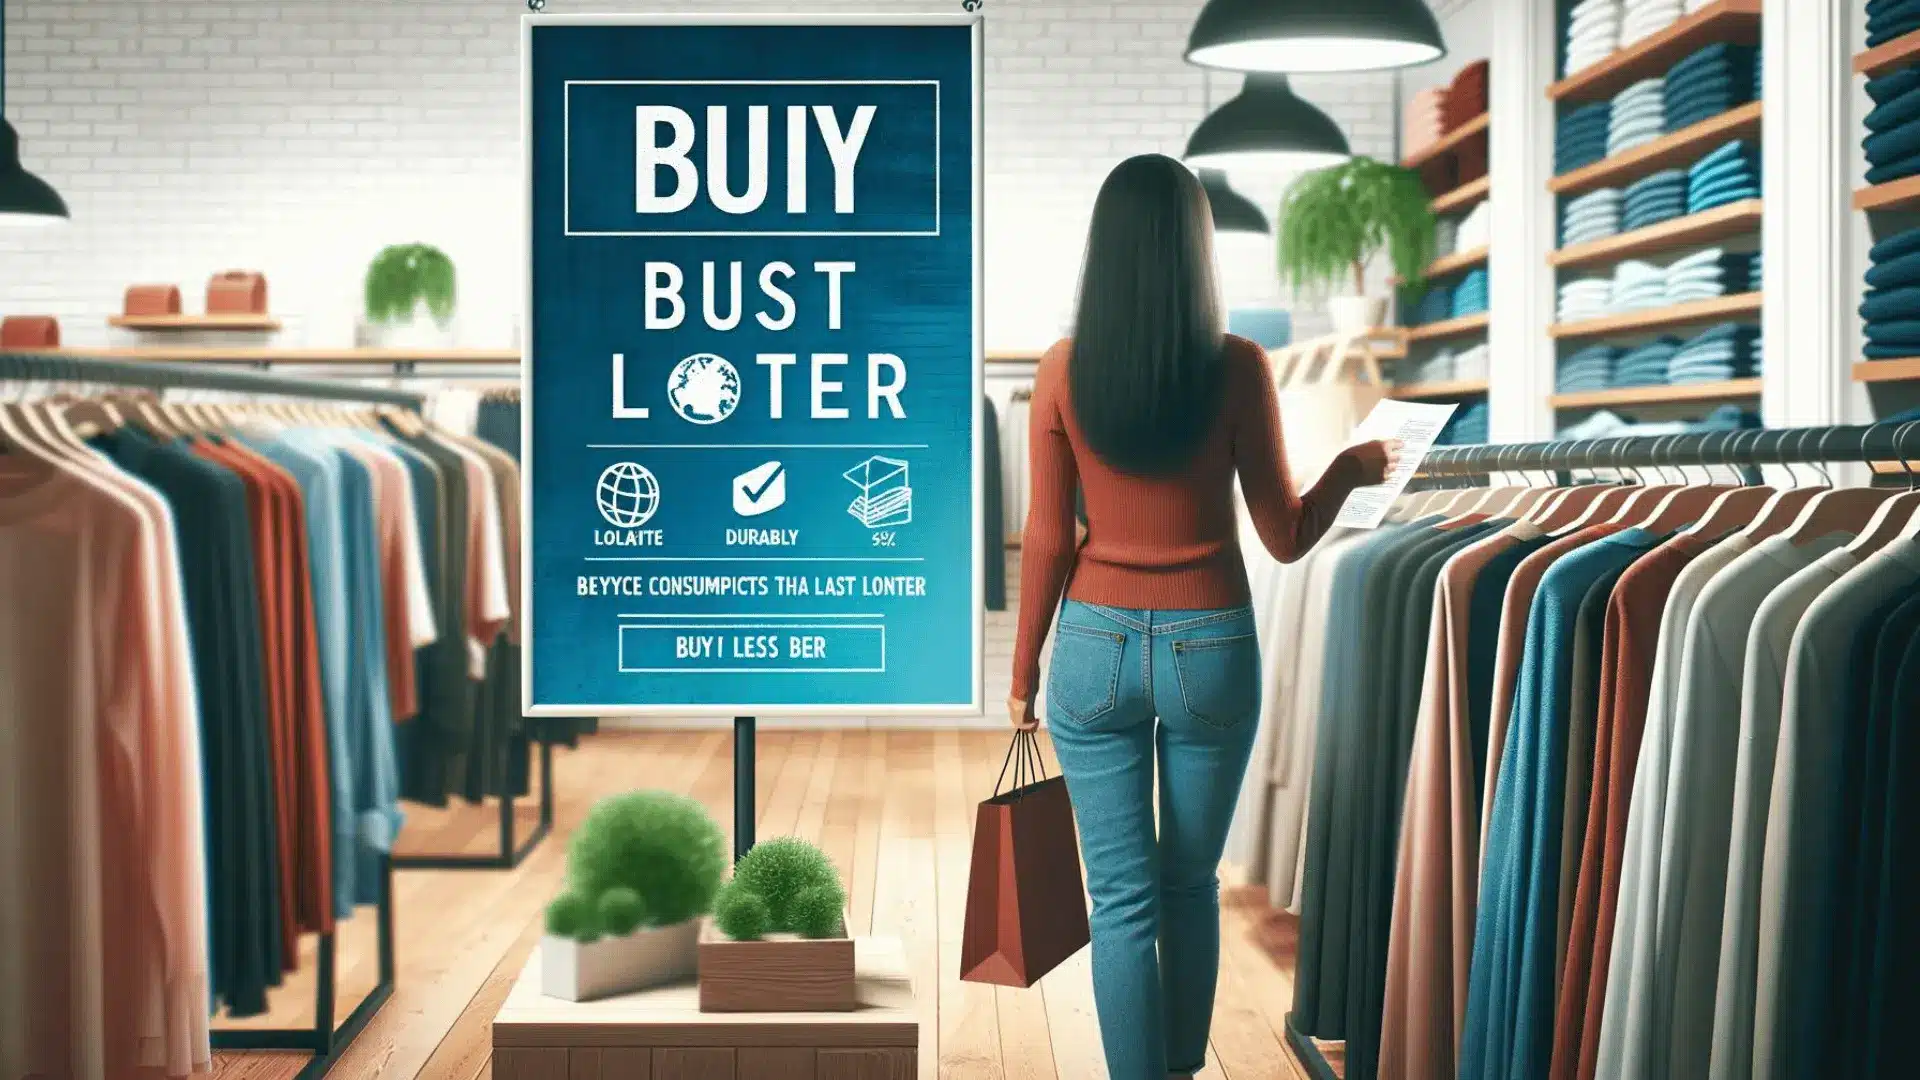 Consumer choosing long-lasting apparel in a clothing store, adhering to sustainable shopping practices.